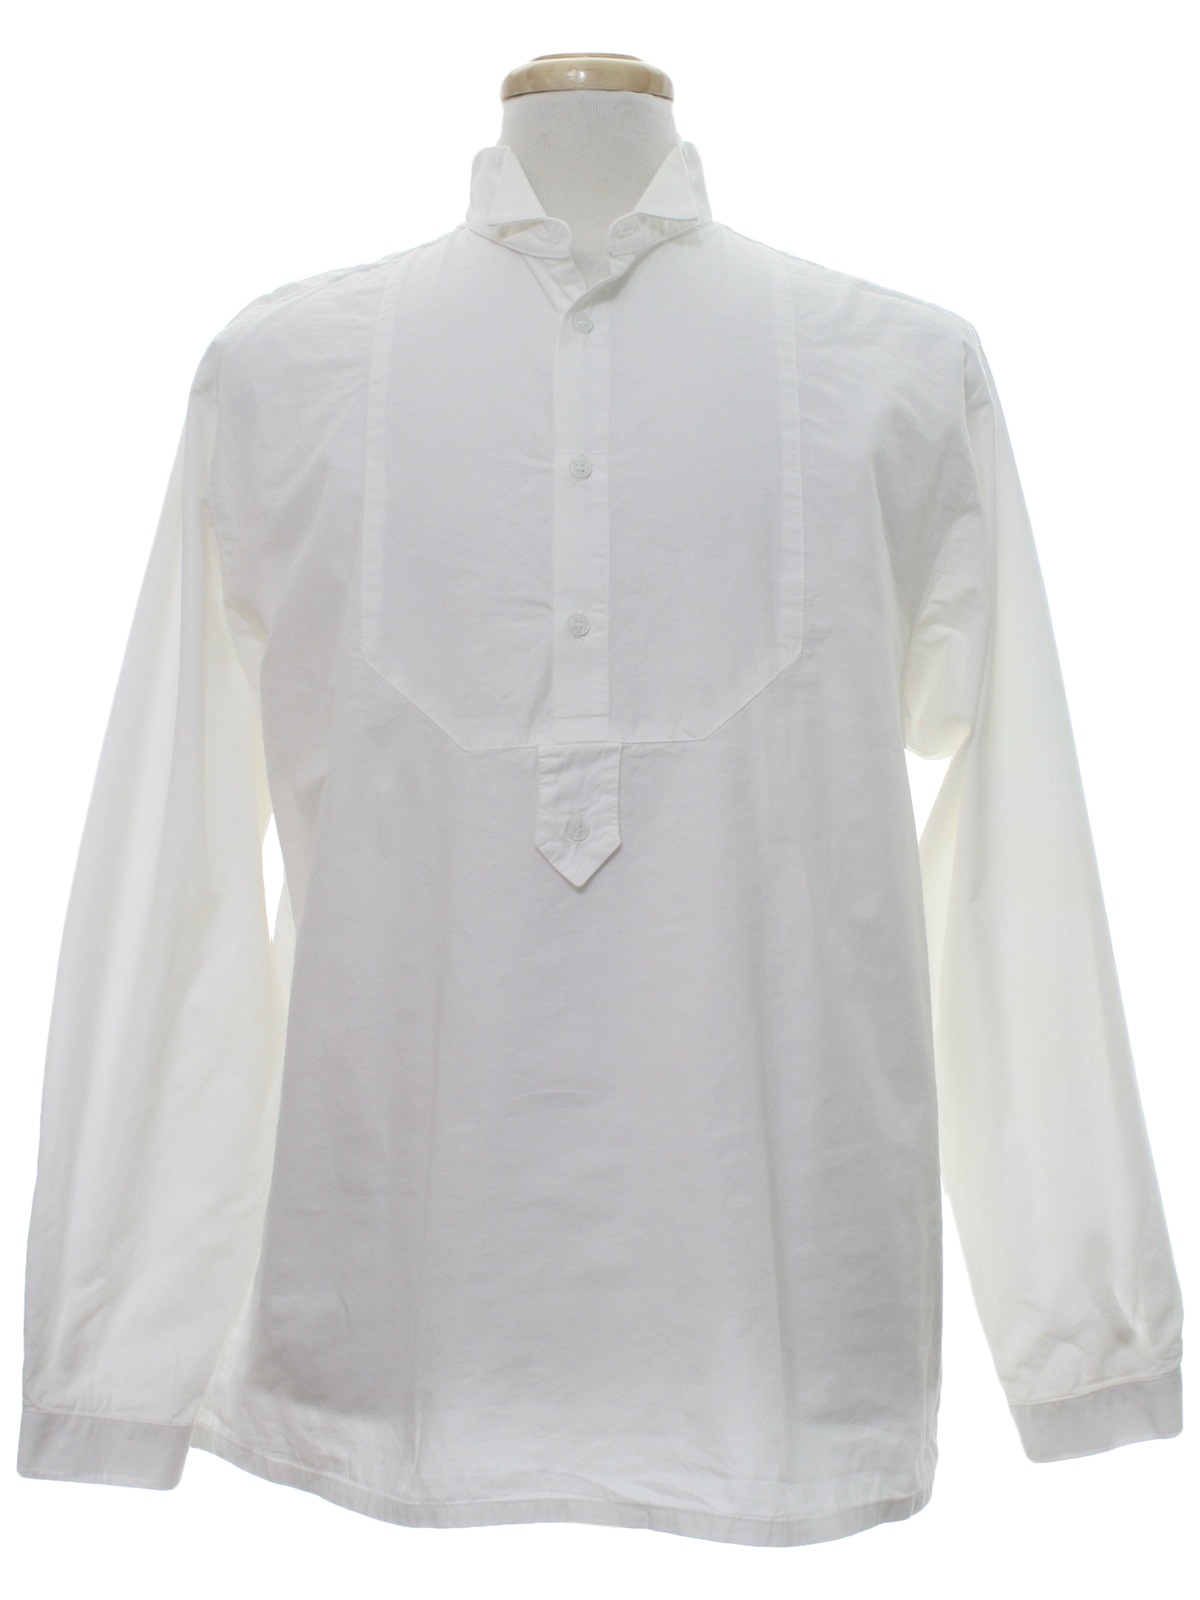 Western Shirt: Pre 1920s Style -Wah Maker- Mens white background cotton ...